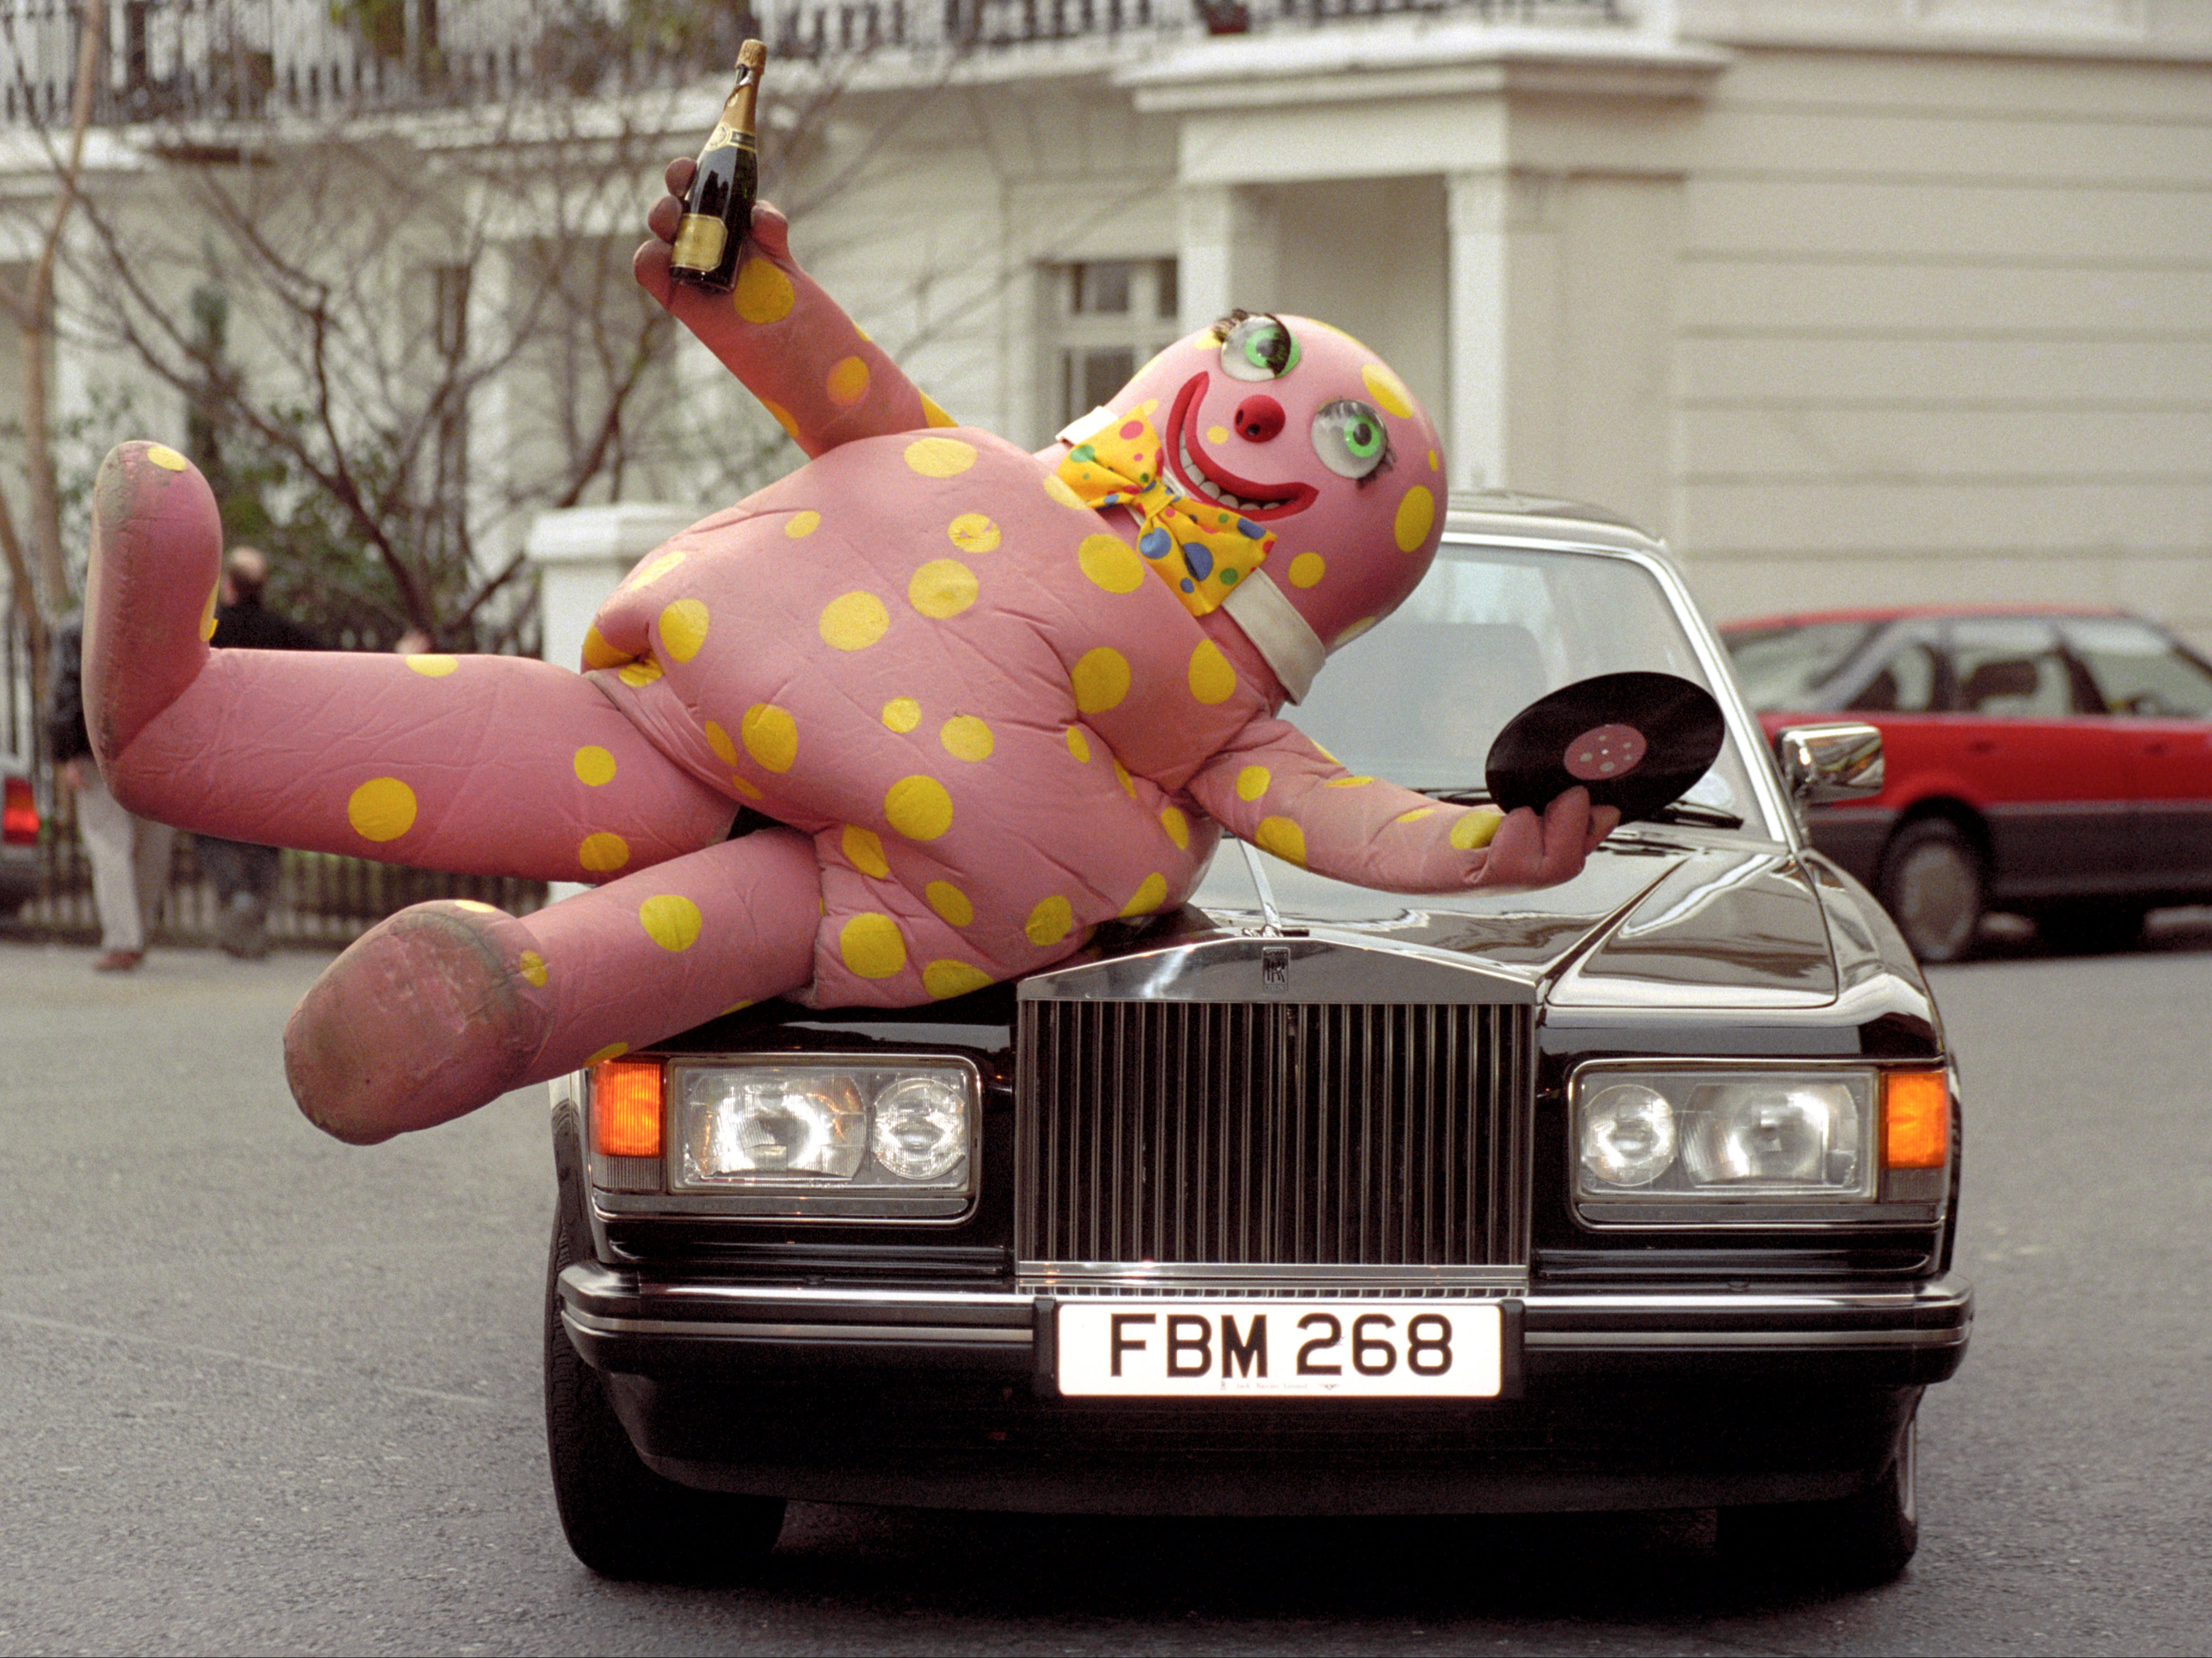 An auction for an original Mr Blobby costume has played out in a characteristically chaotic fashion